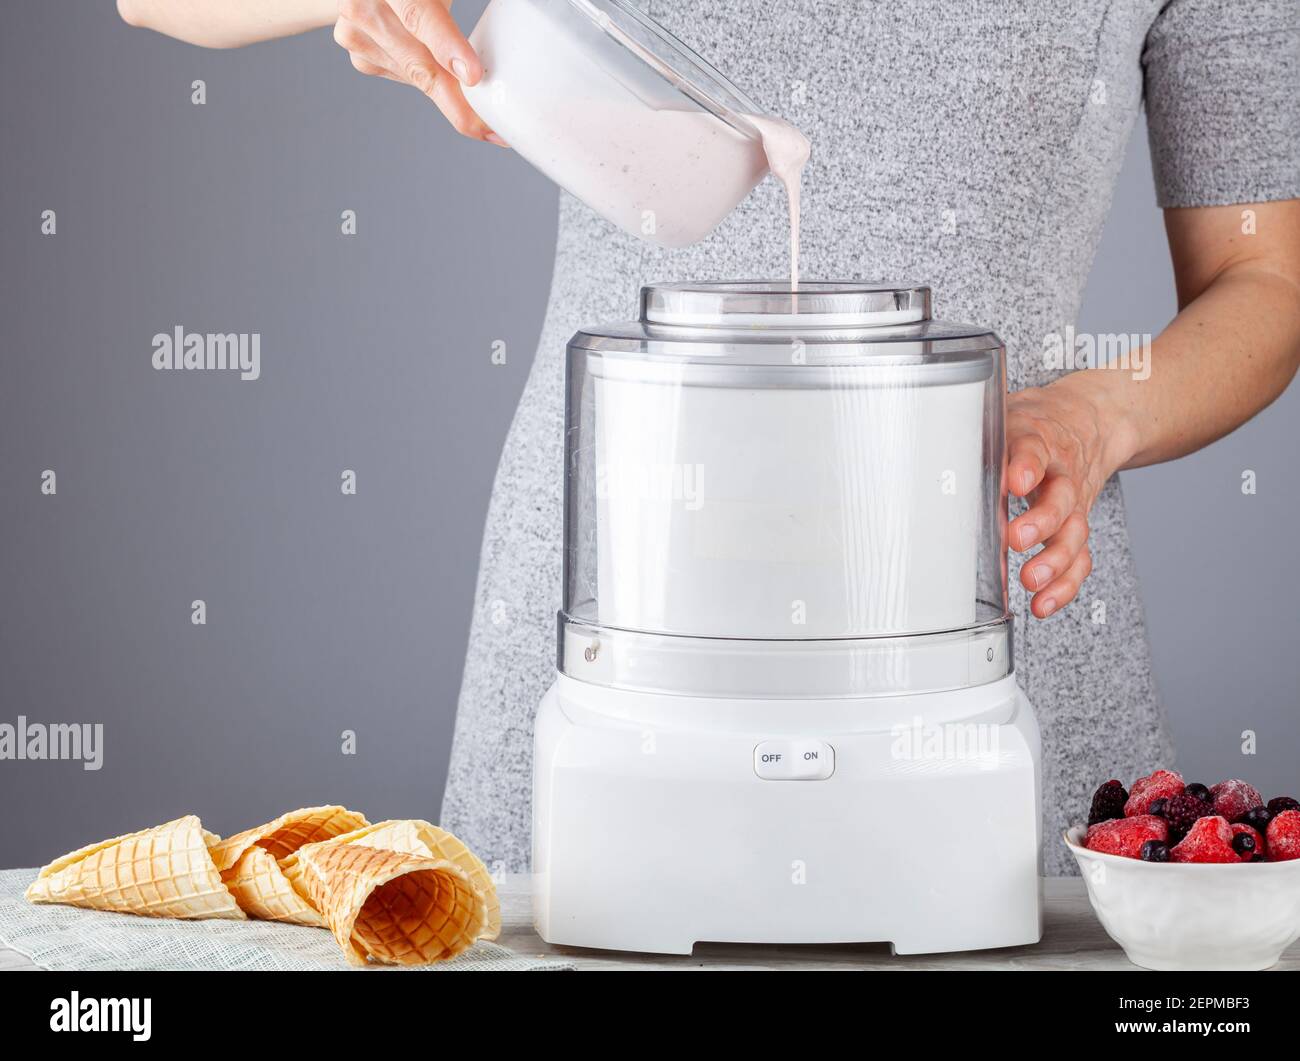 A caucasian woman is pouring homemade all natural ice cream mixture into an ice cream maker machine. Berry and strawberries were added to add flavor. Stock Photo